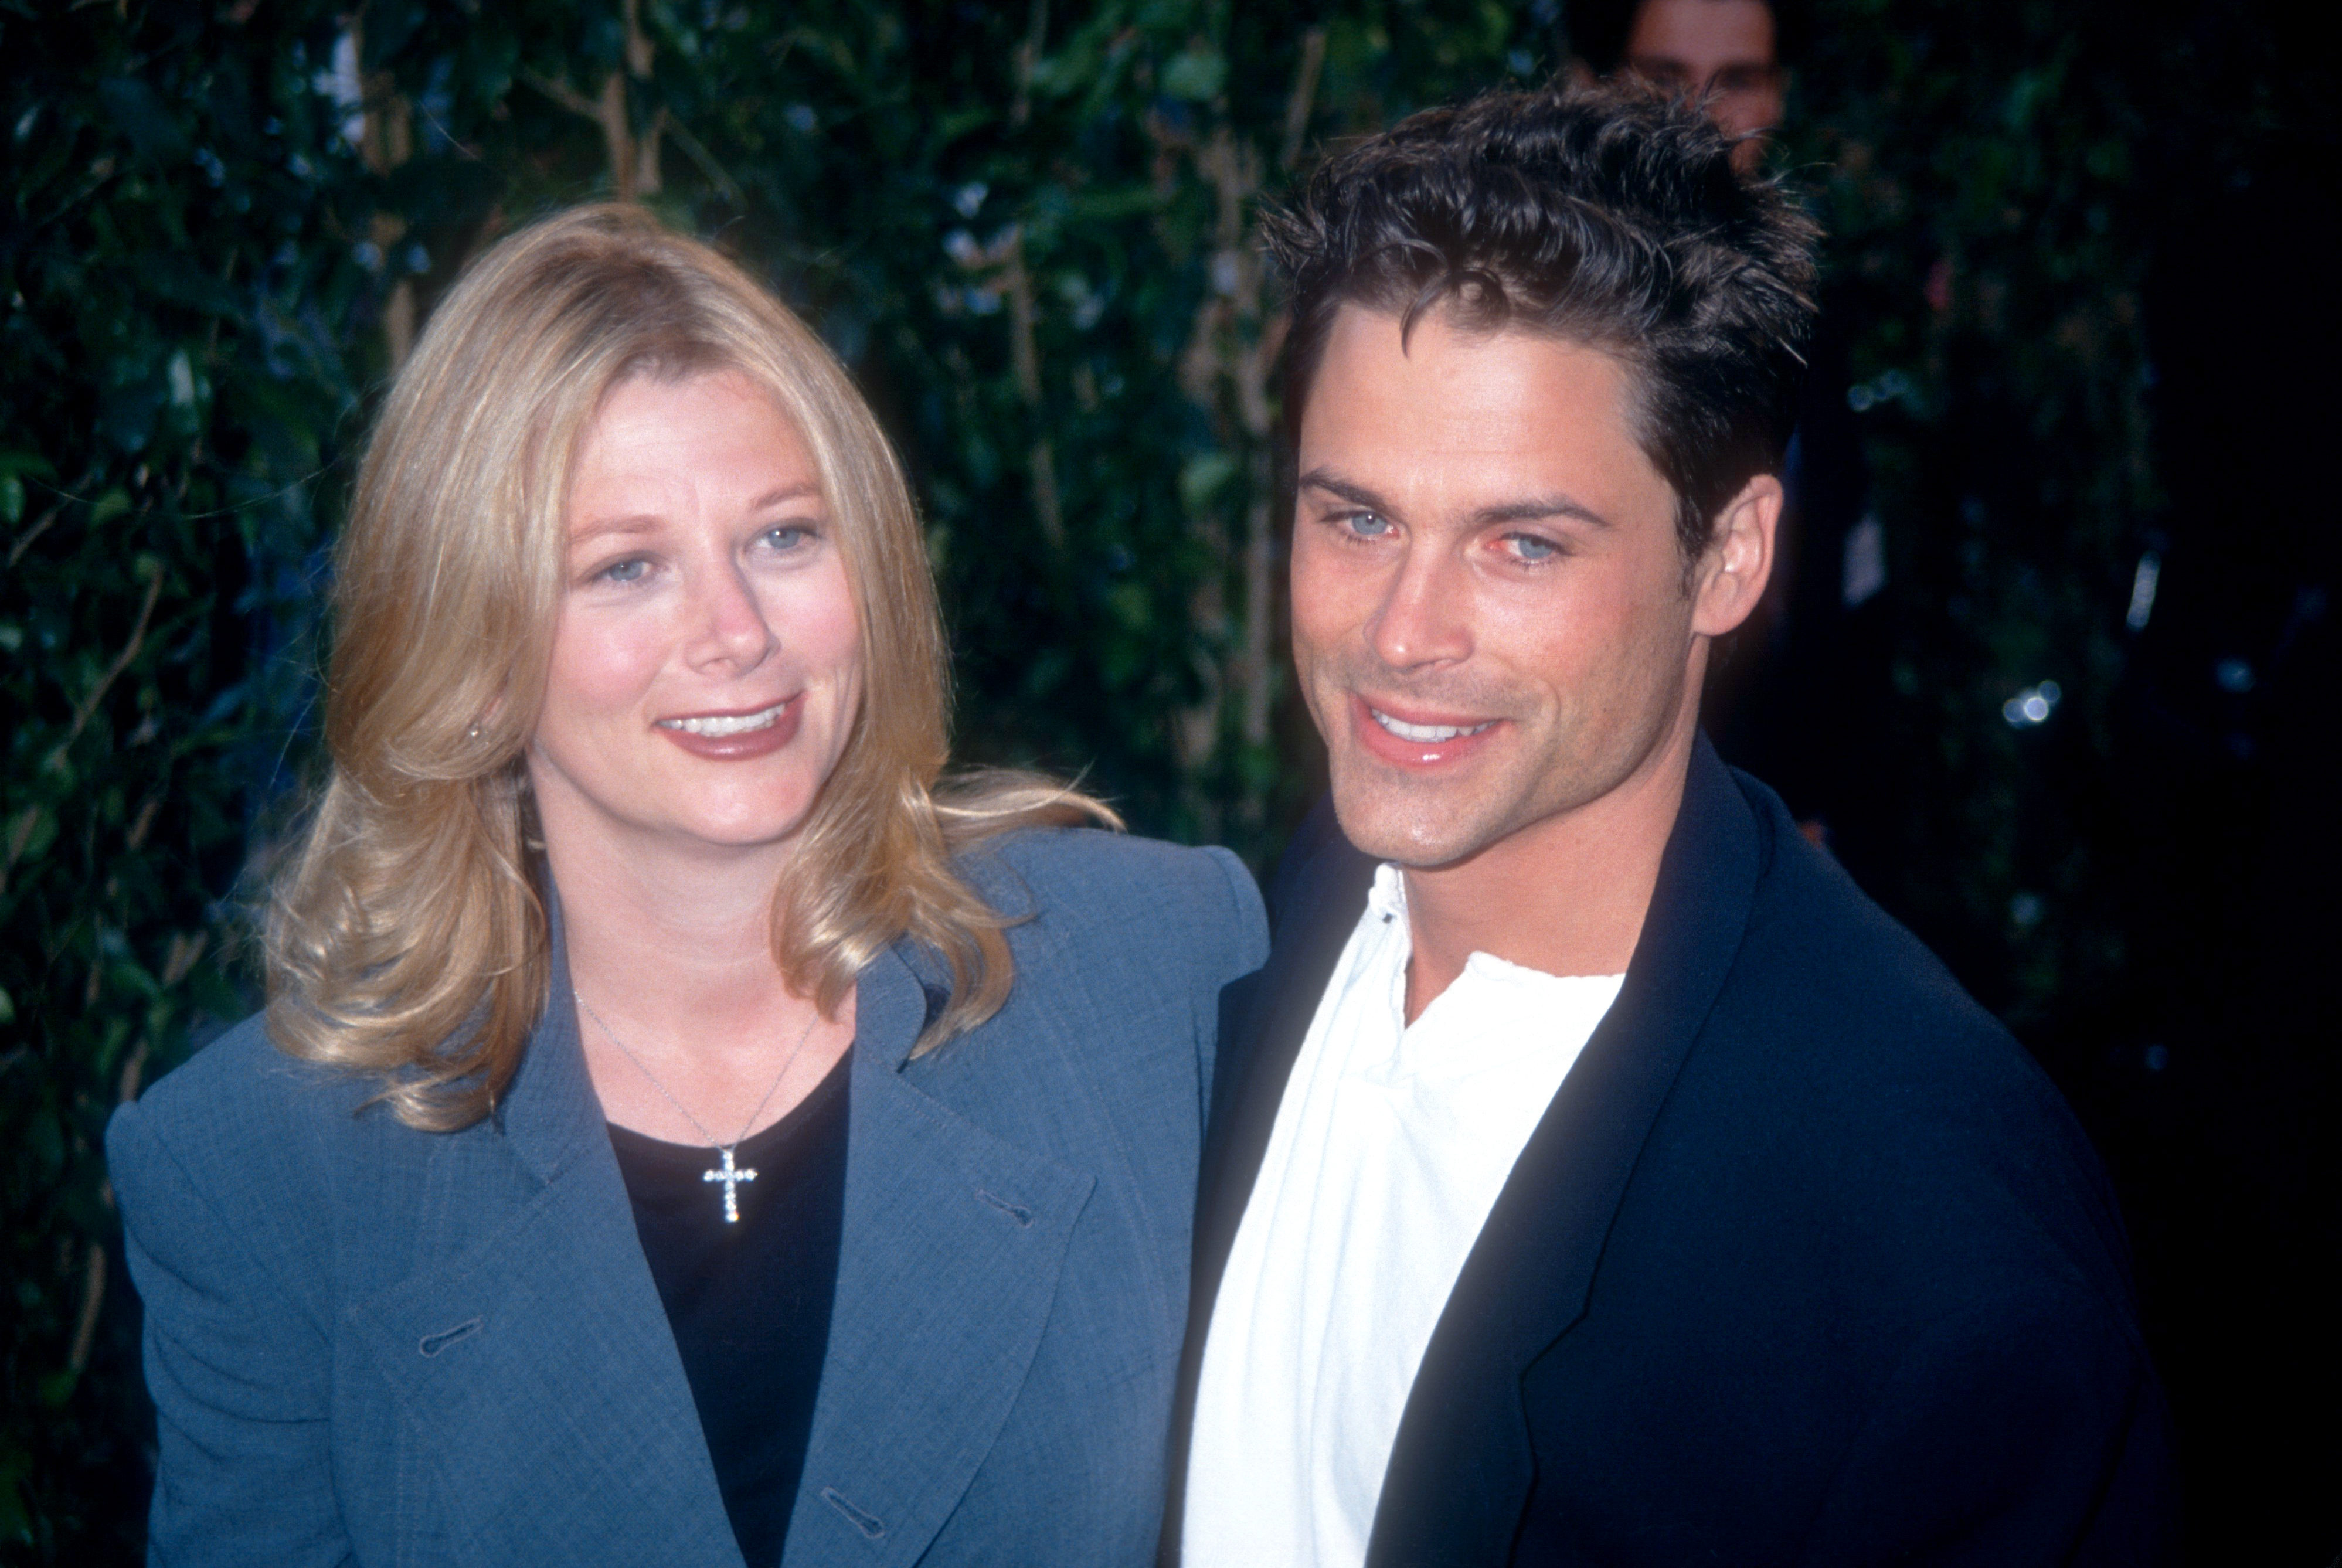 Rob Lowe and Sheryl Berkoff at the 'True Lies' premiere on July 12, 1994 at the Mann Village Theatre in Westwood, California | Source: Getty Images